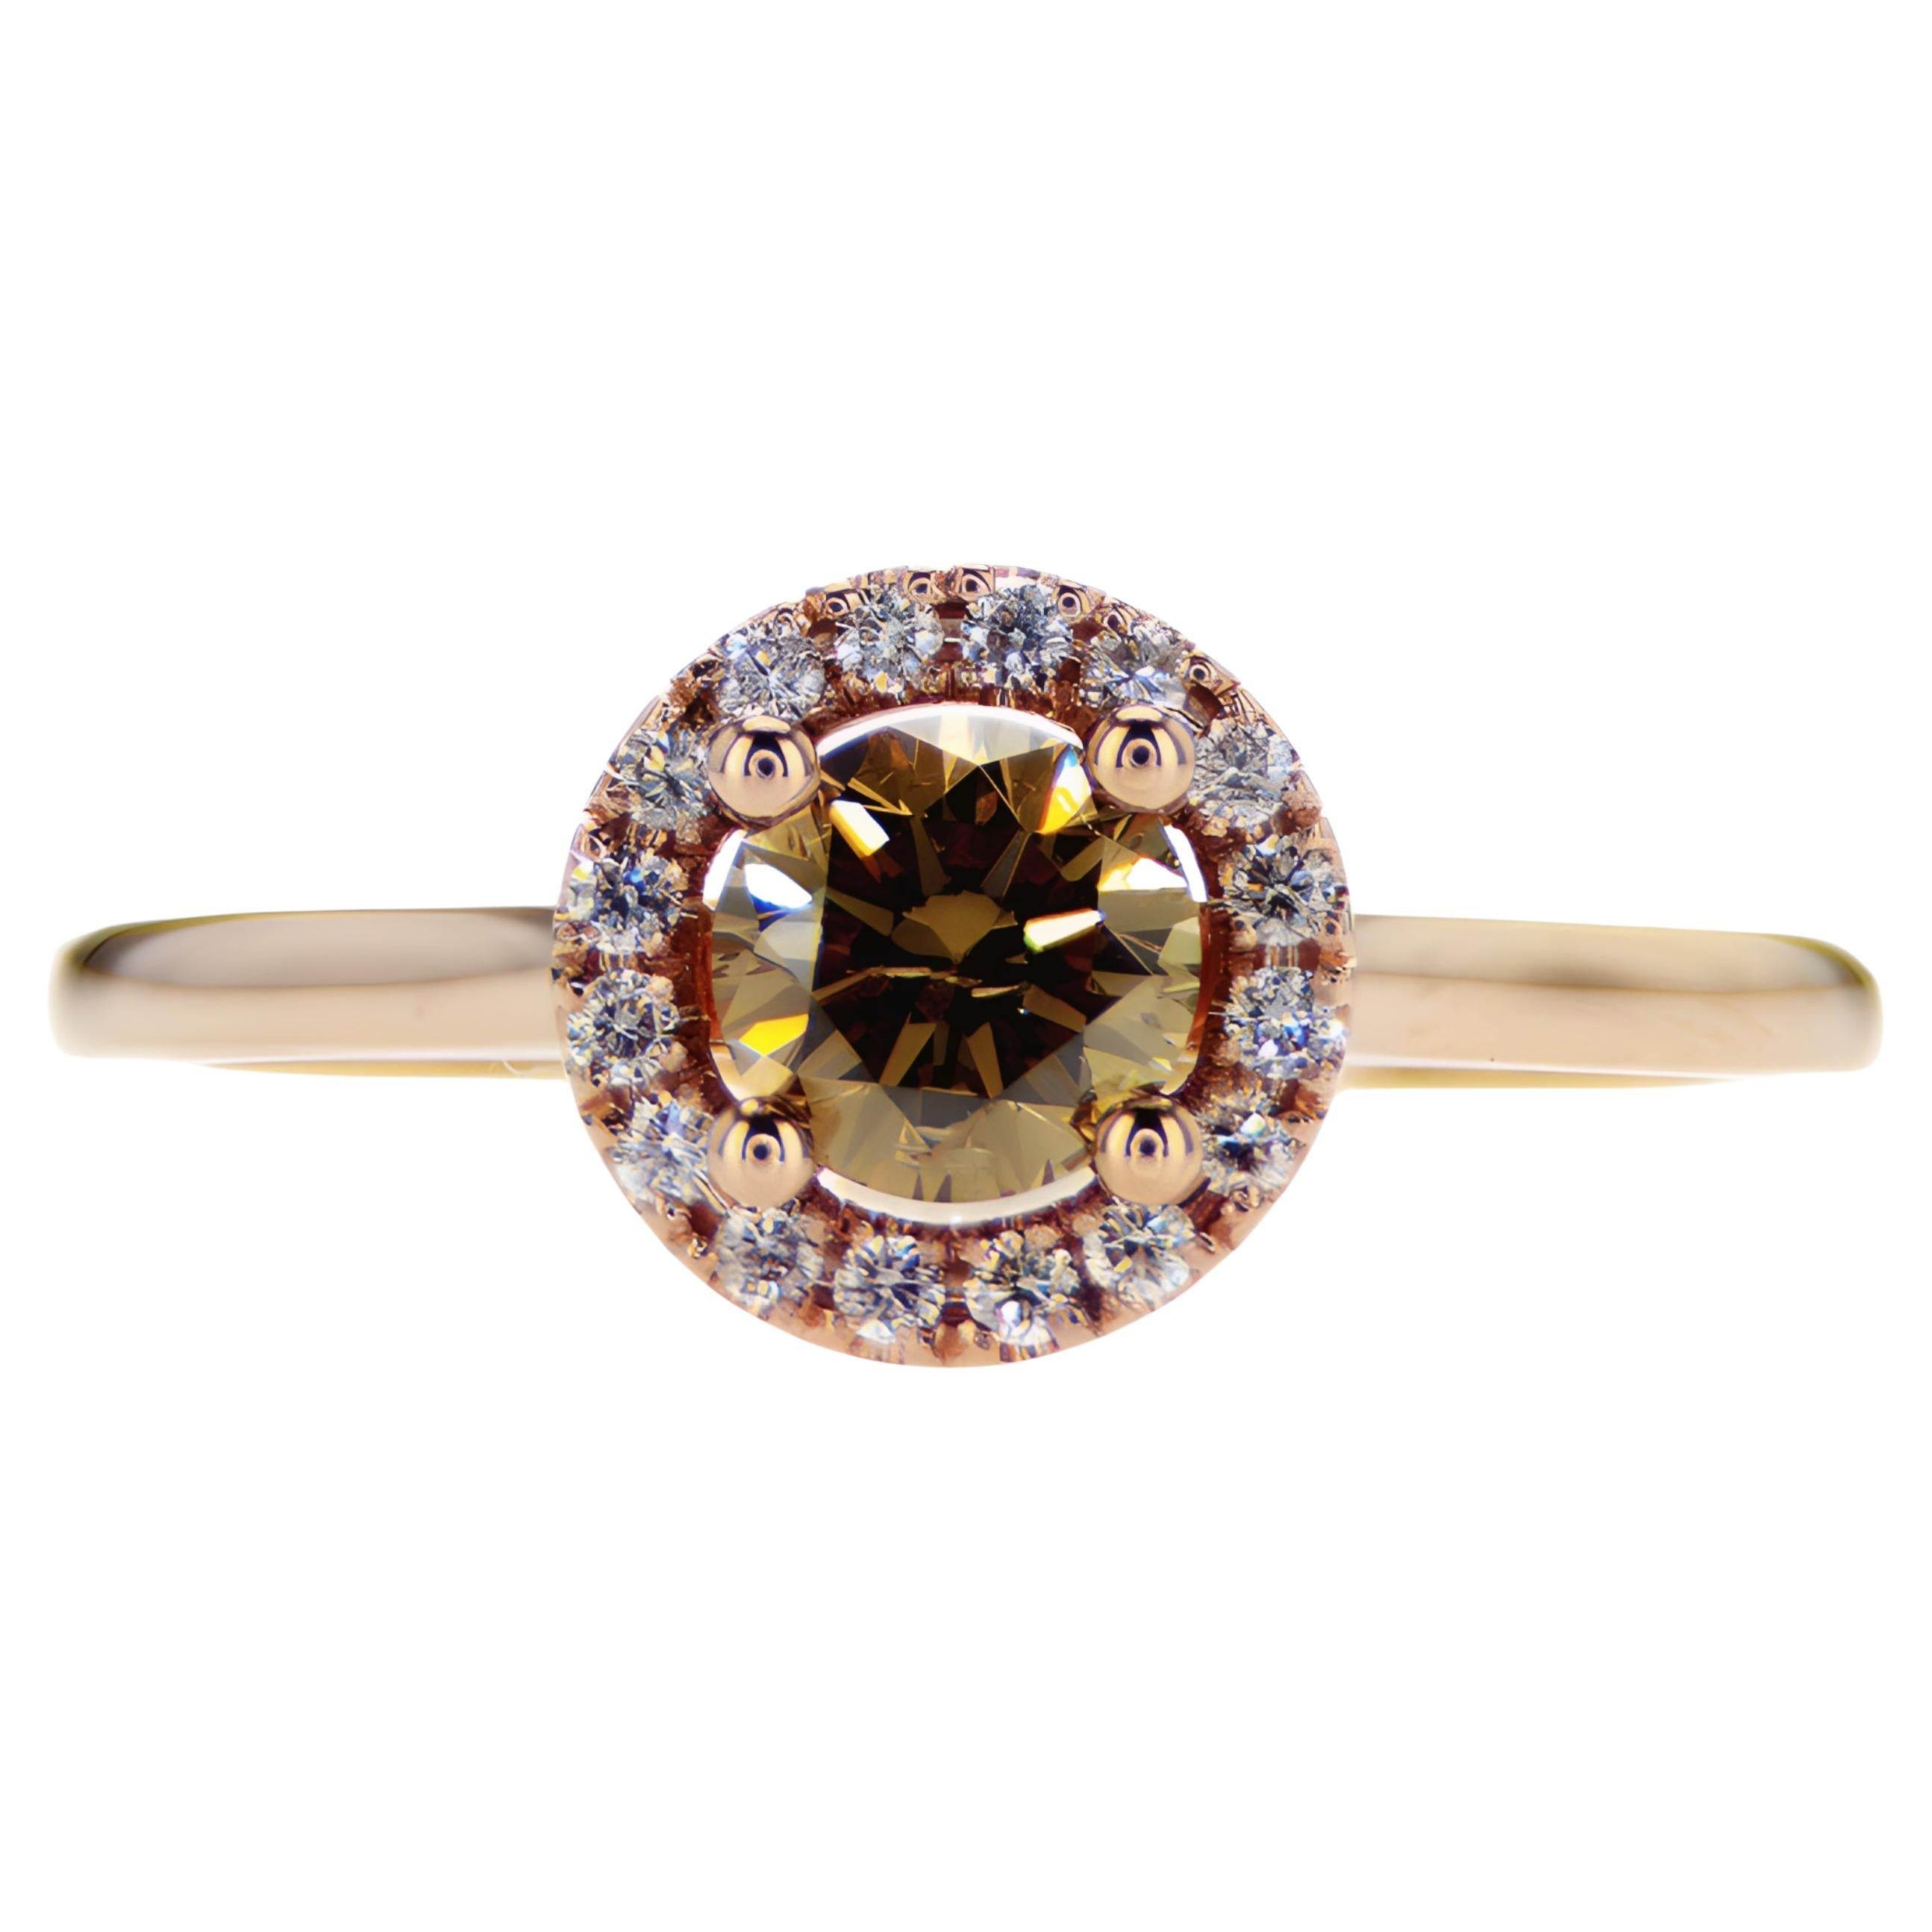 For Sale:  Round Fancy Brownish Yellow Diamond Engagement Ring